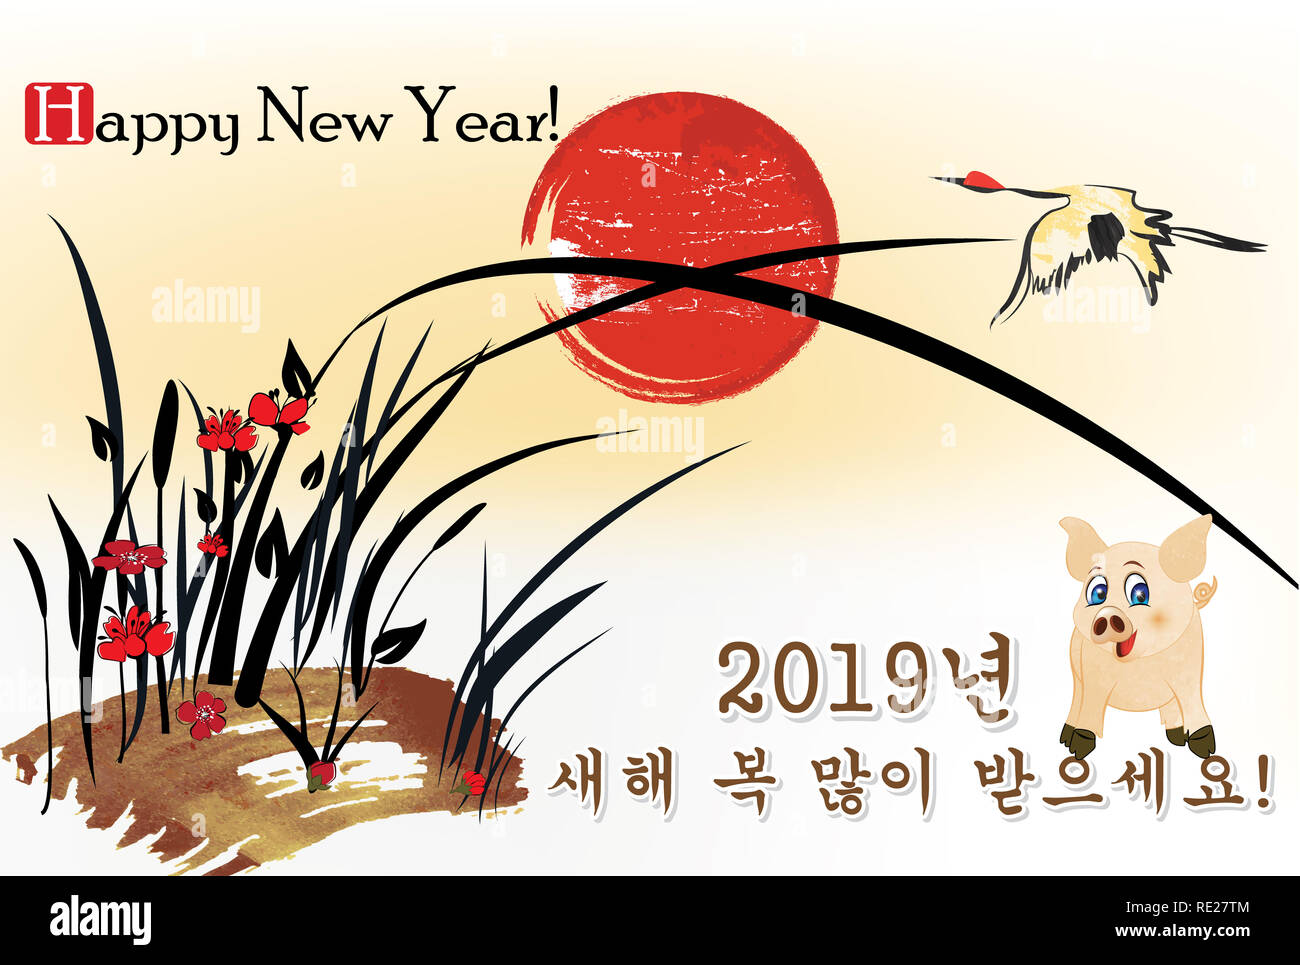 Vintage Style Korean Greeting Card Designed For The Spring Festival Lunar New Year Of The Earth Boar Celebration Text Happy New Year 19 Stock Photo Alamy